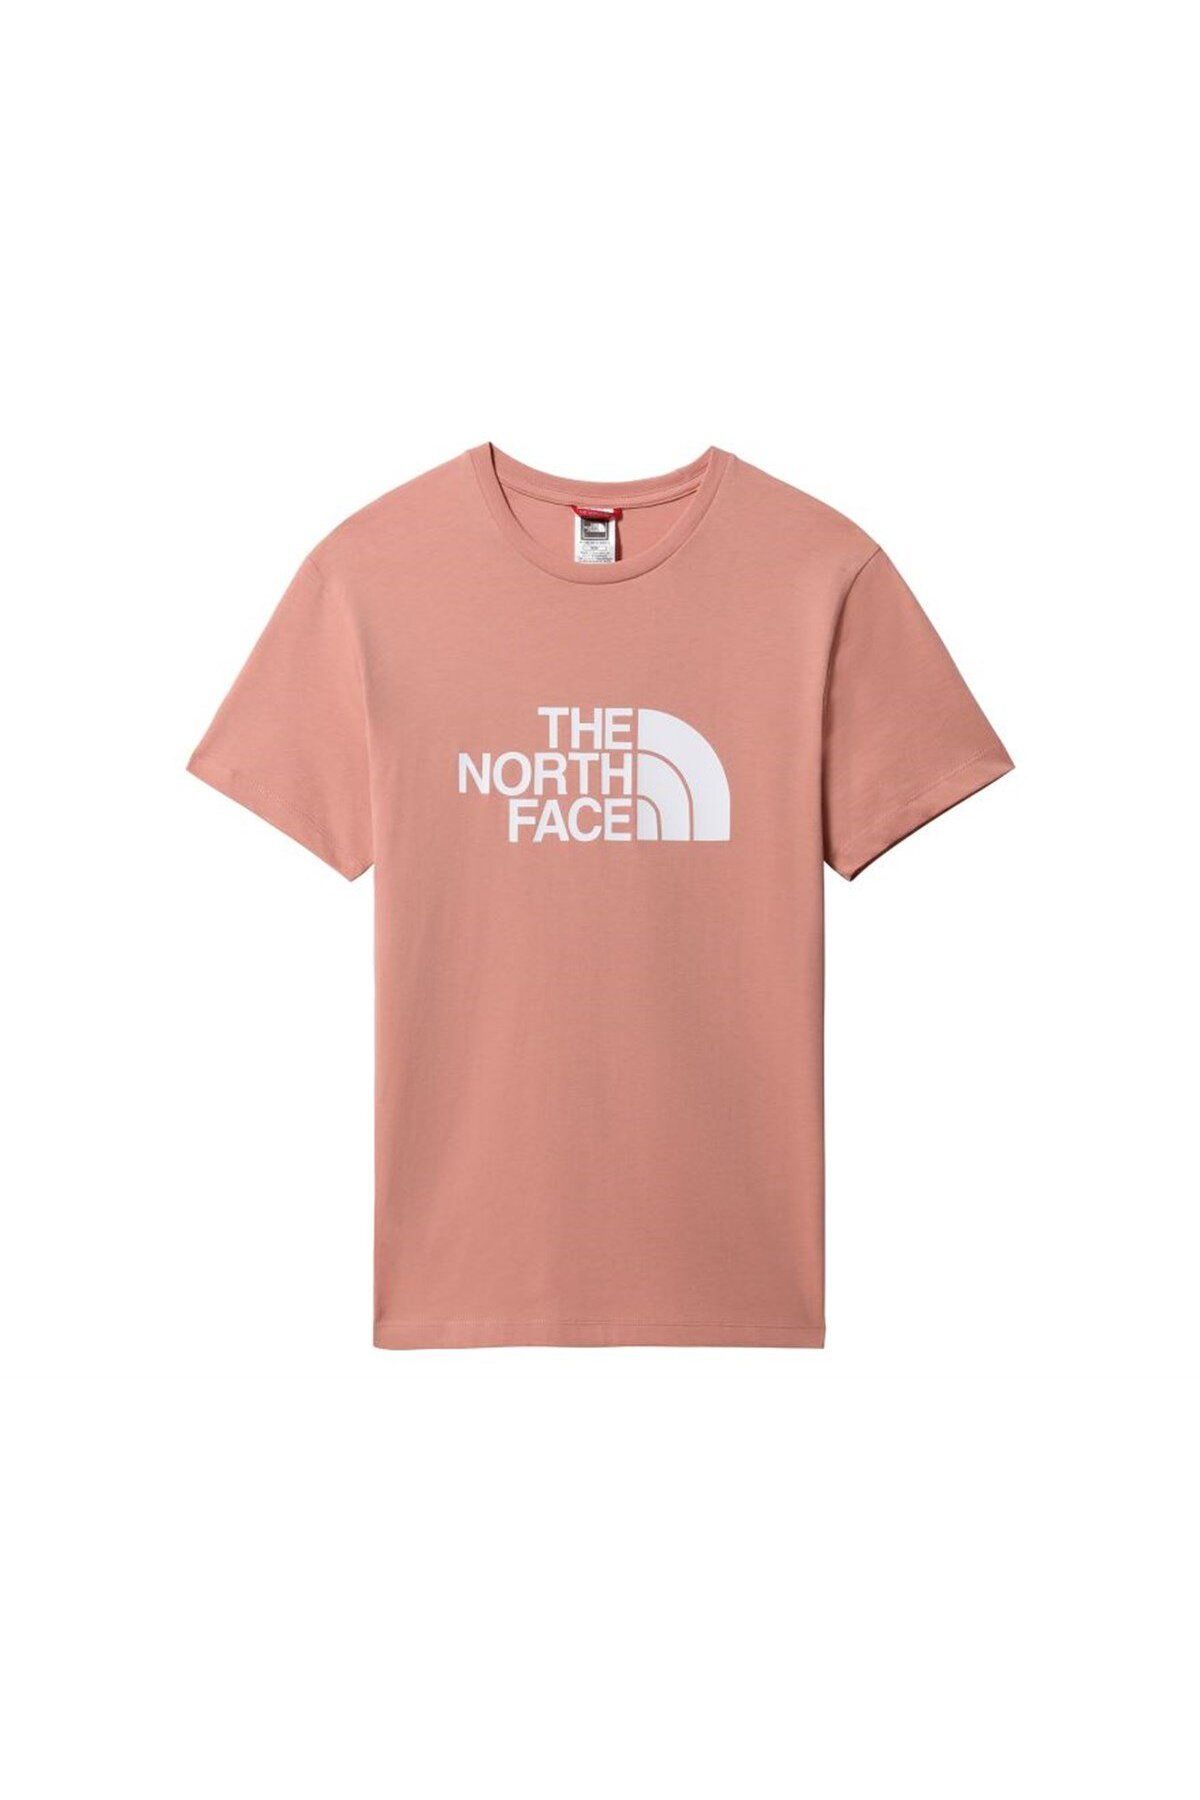 The North Face The Nort Face W S/s Easy Tee Kadın T-shirt Nf0a4t1qhcz1